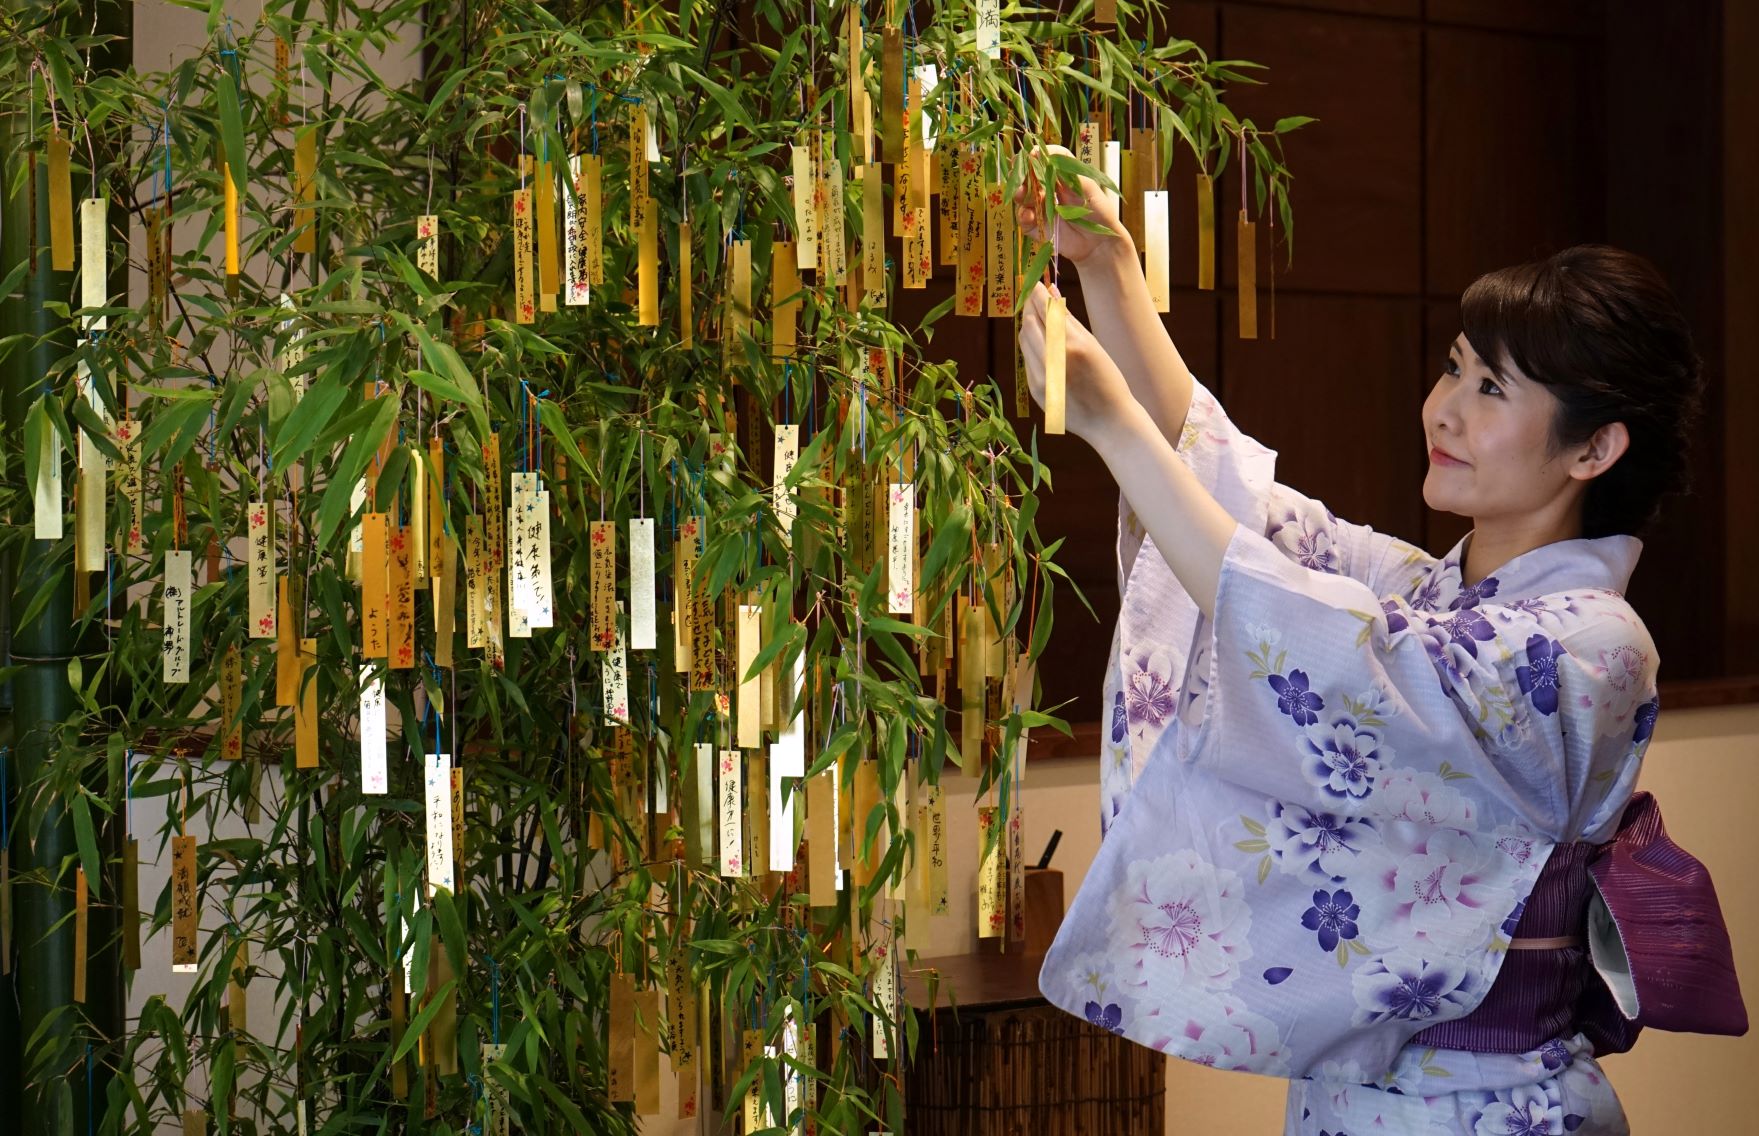  A jewelry store employee hangs a gold leaf strip wishing card onto a bamboo decoration during the annual celebration of “Tanabata” in Tokyo on July 4, 2018. (File photo: AFP)